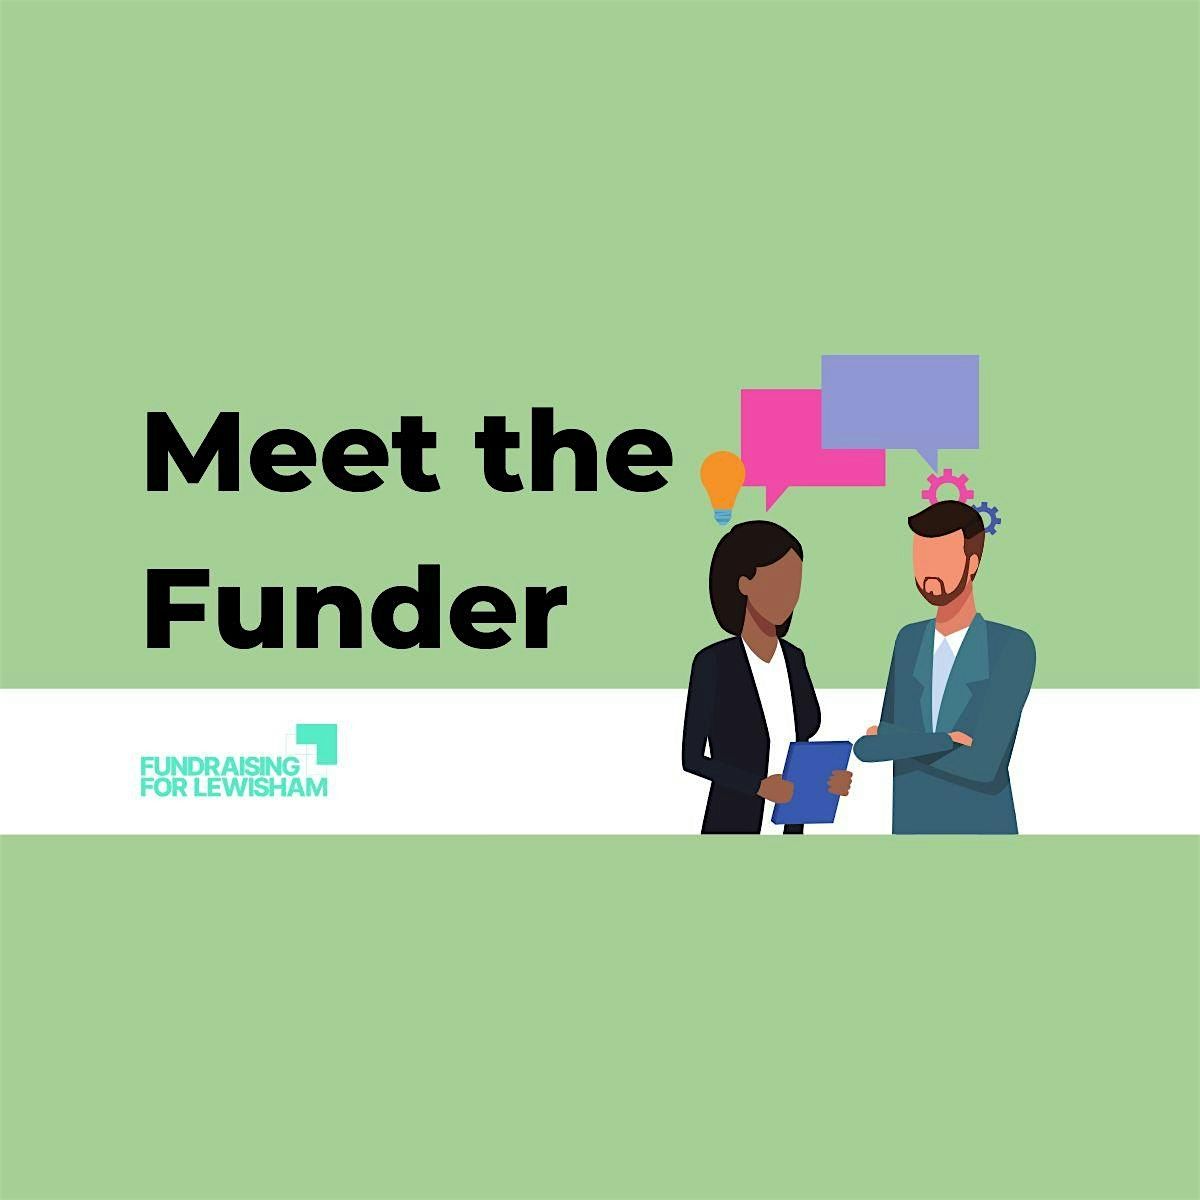 Meet the Funder: The Council takes us through NCIL Funding